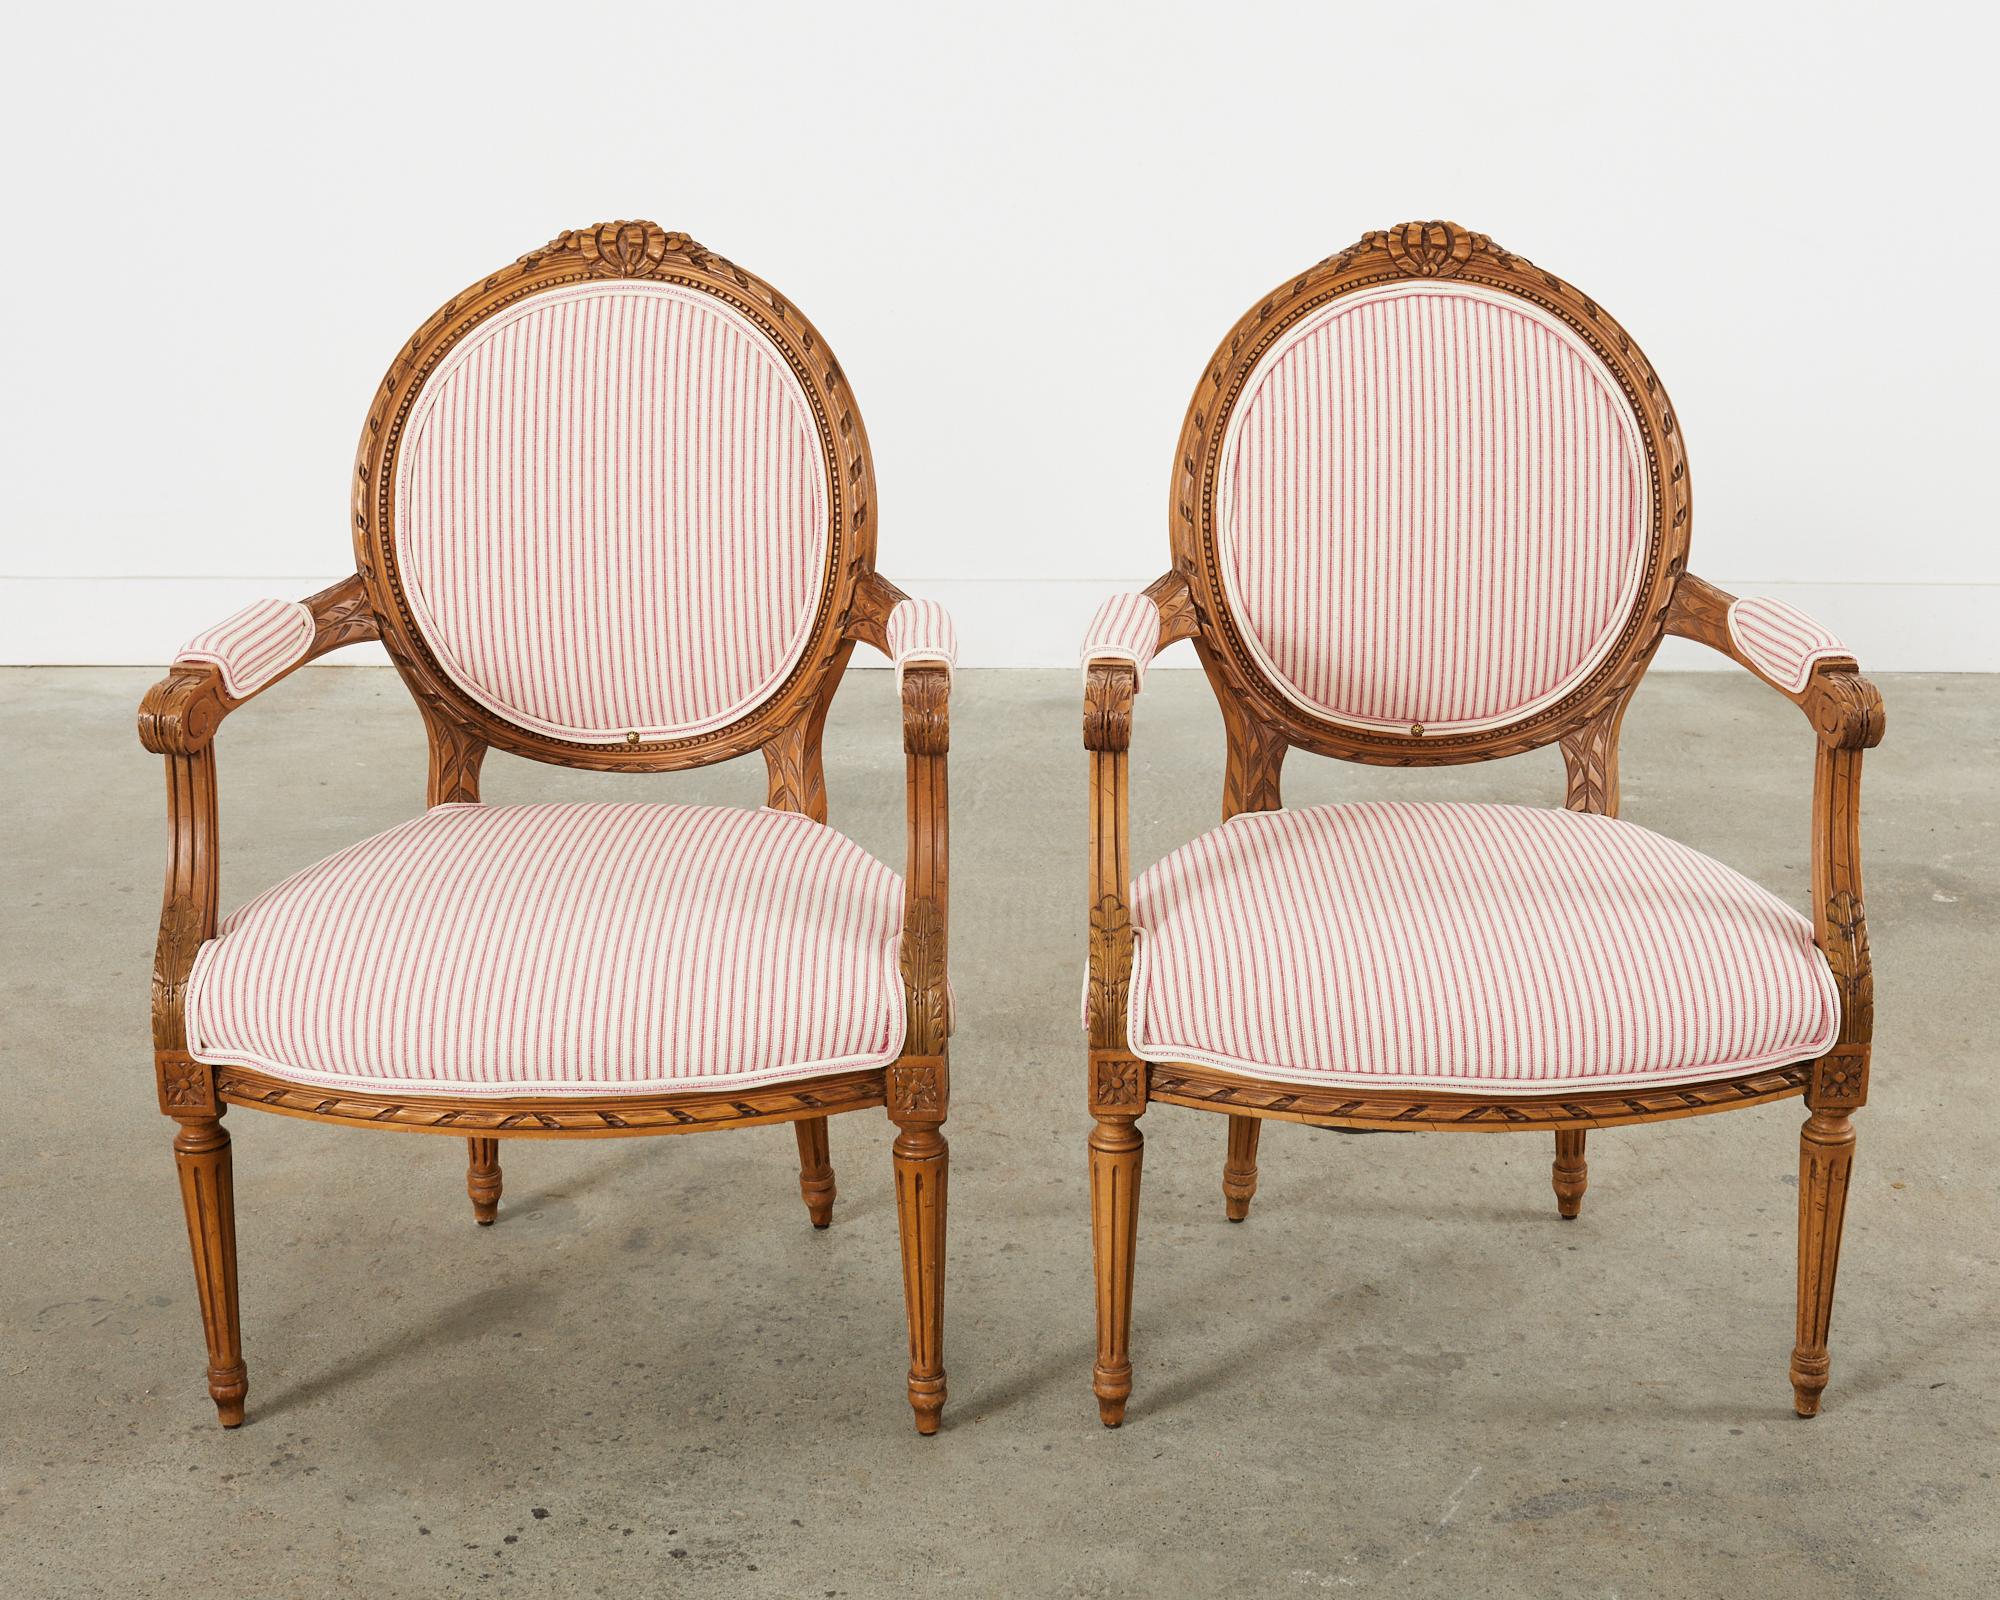 Gorgeous pair of French carved fauteuil armchairs made in the grand Louis XVI taste. The intricately carved frames are decorated with neoclassical motifs of acanthus, rosettes, and ribbon swag bows. The chairs have wide arms measuring 25 inches high